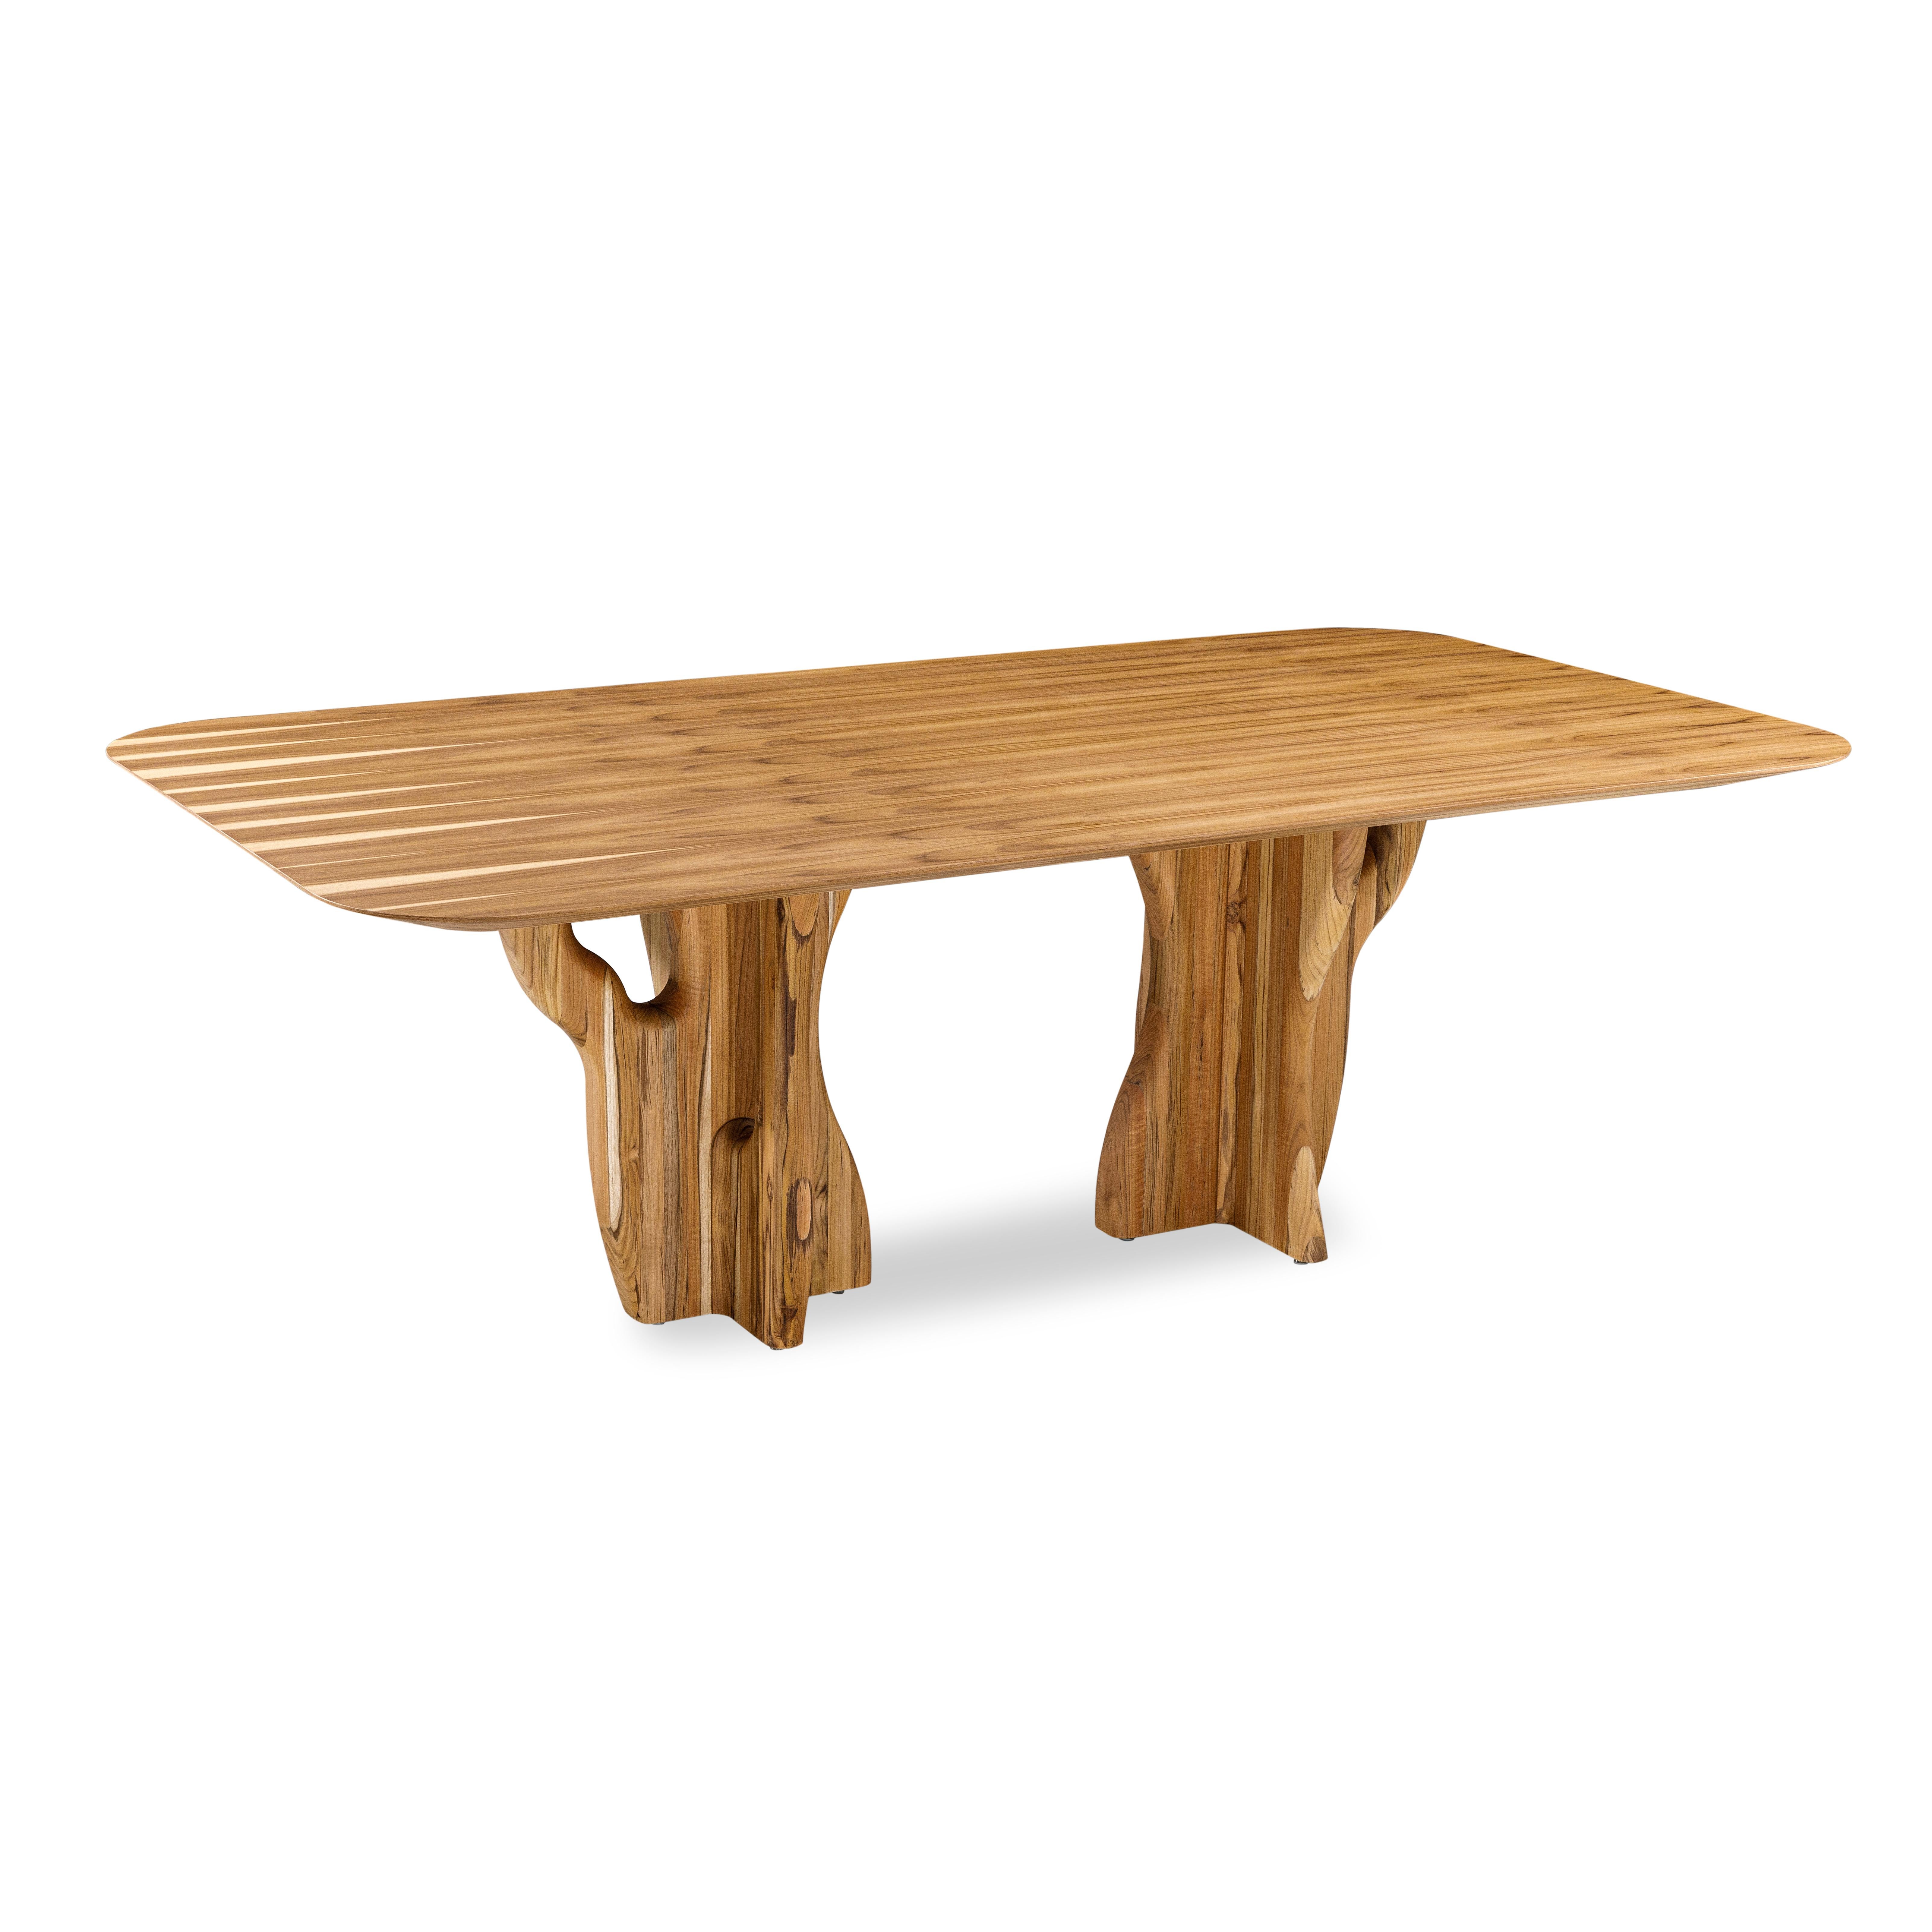 Contemporary Suma Dining Table with Teak Veneered Top and Organic Solid Wood Legs 86'' For Sale